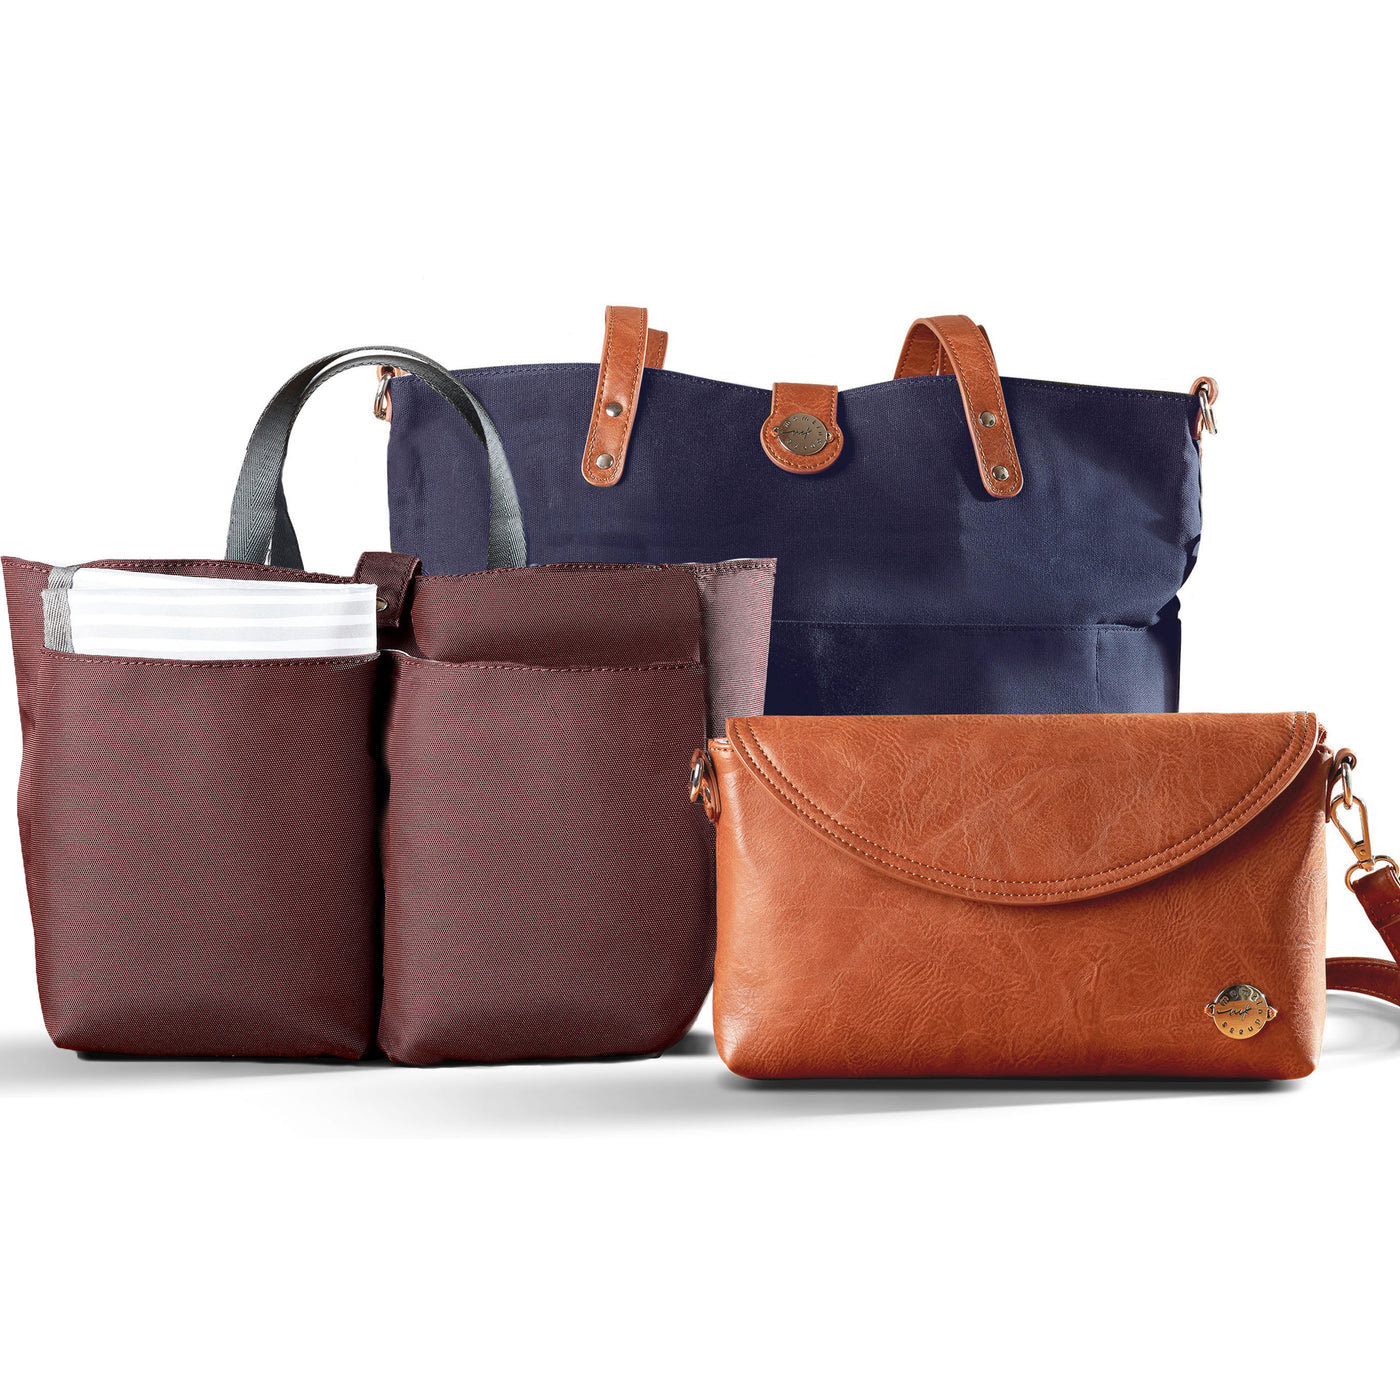 Navy CarryAll Tote Trio shown with three included components; navy waxed canvas tote with brown vegan leather accents, brown vegan leather diaper clutch and burgundy multi-pocket organizer insert with carry handles.